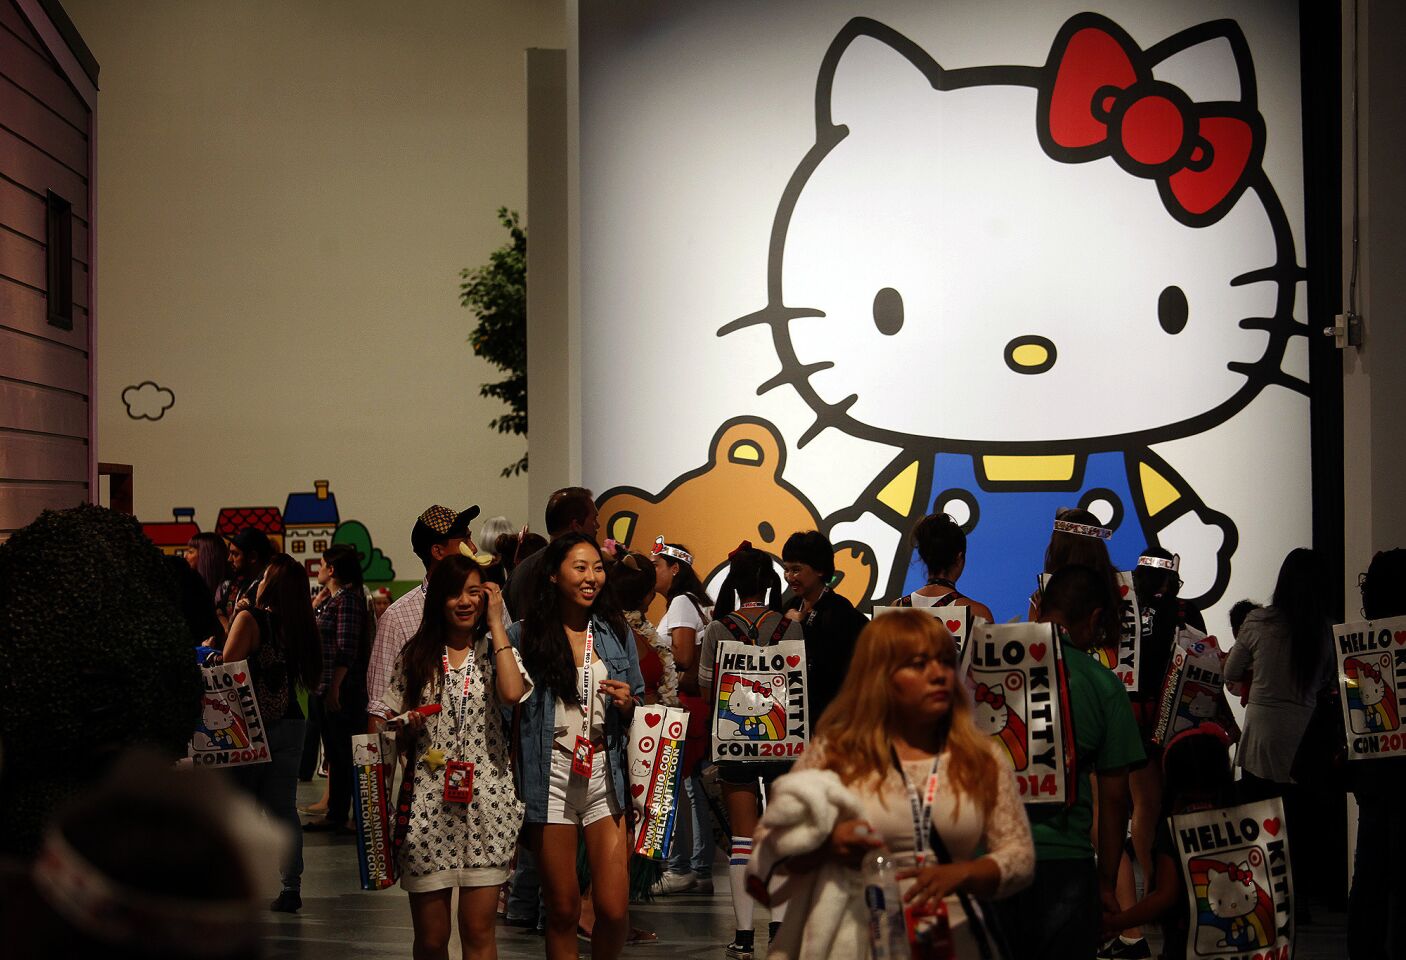 Arts and culture in pictures by The Times | Hello Kitty Con 2014